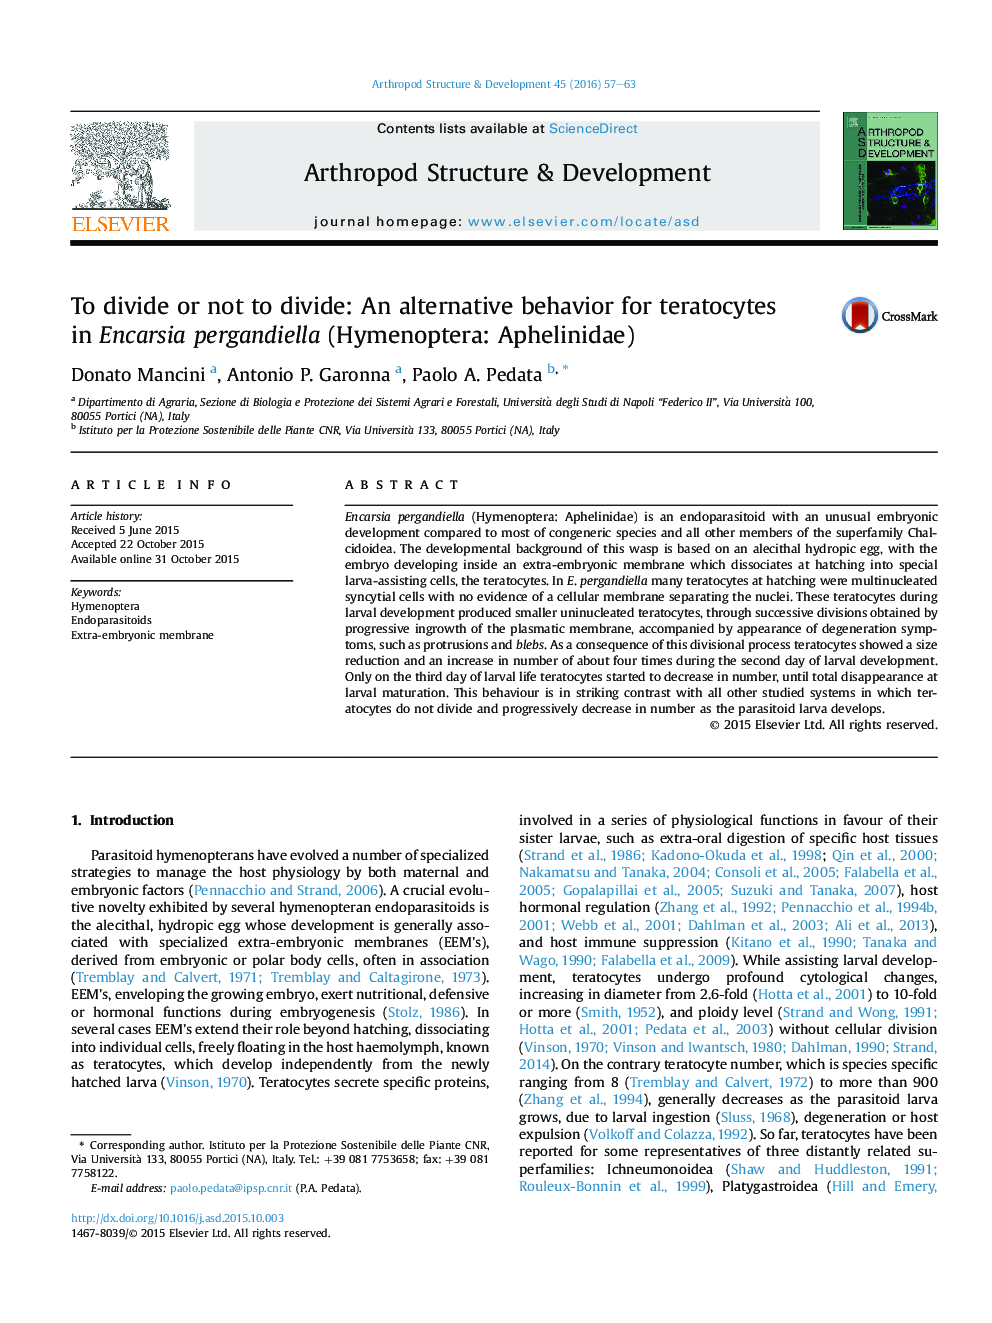 To divide or not to divide: An alternative behavior for teratocytes in Encarsia pergandiella (Hymenoptera: Aphelinidae)